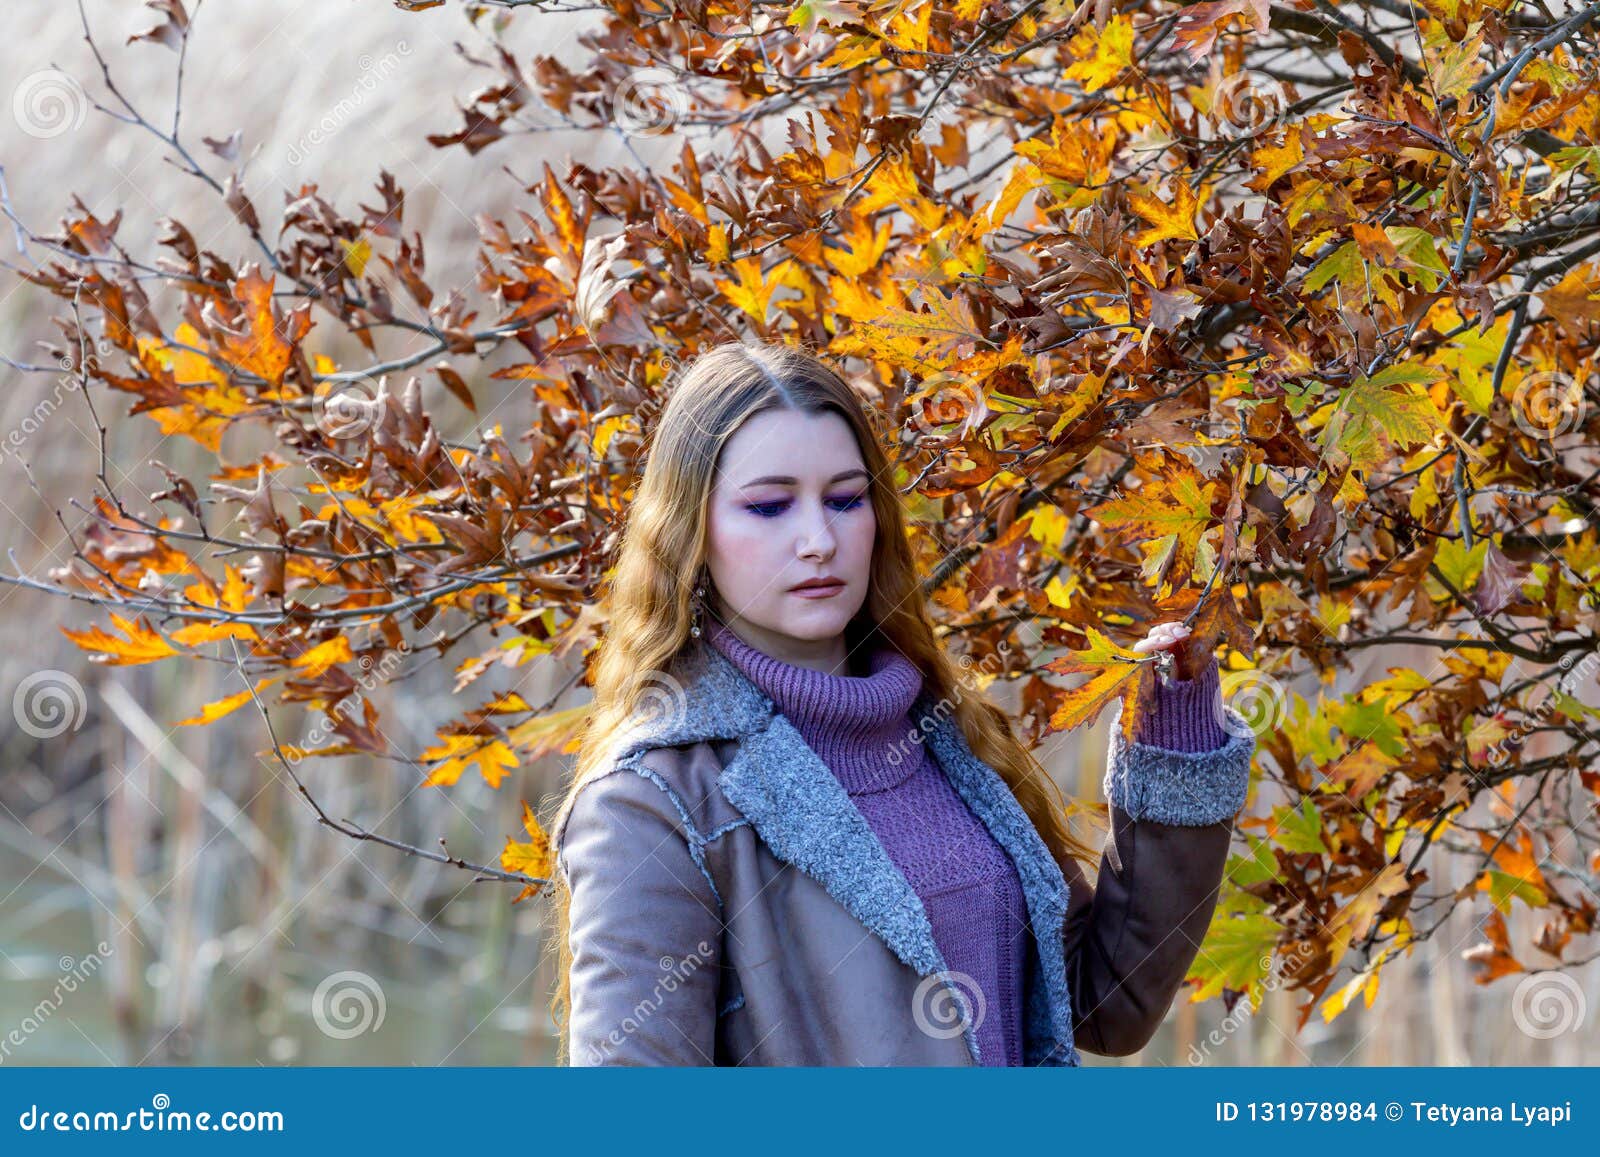 Young Beautiful Woman On The Background Of The Autumn Forest Stock ...